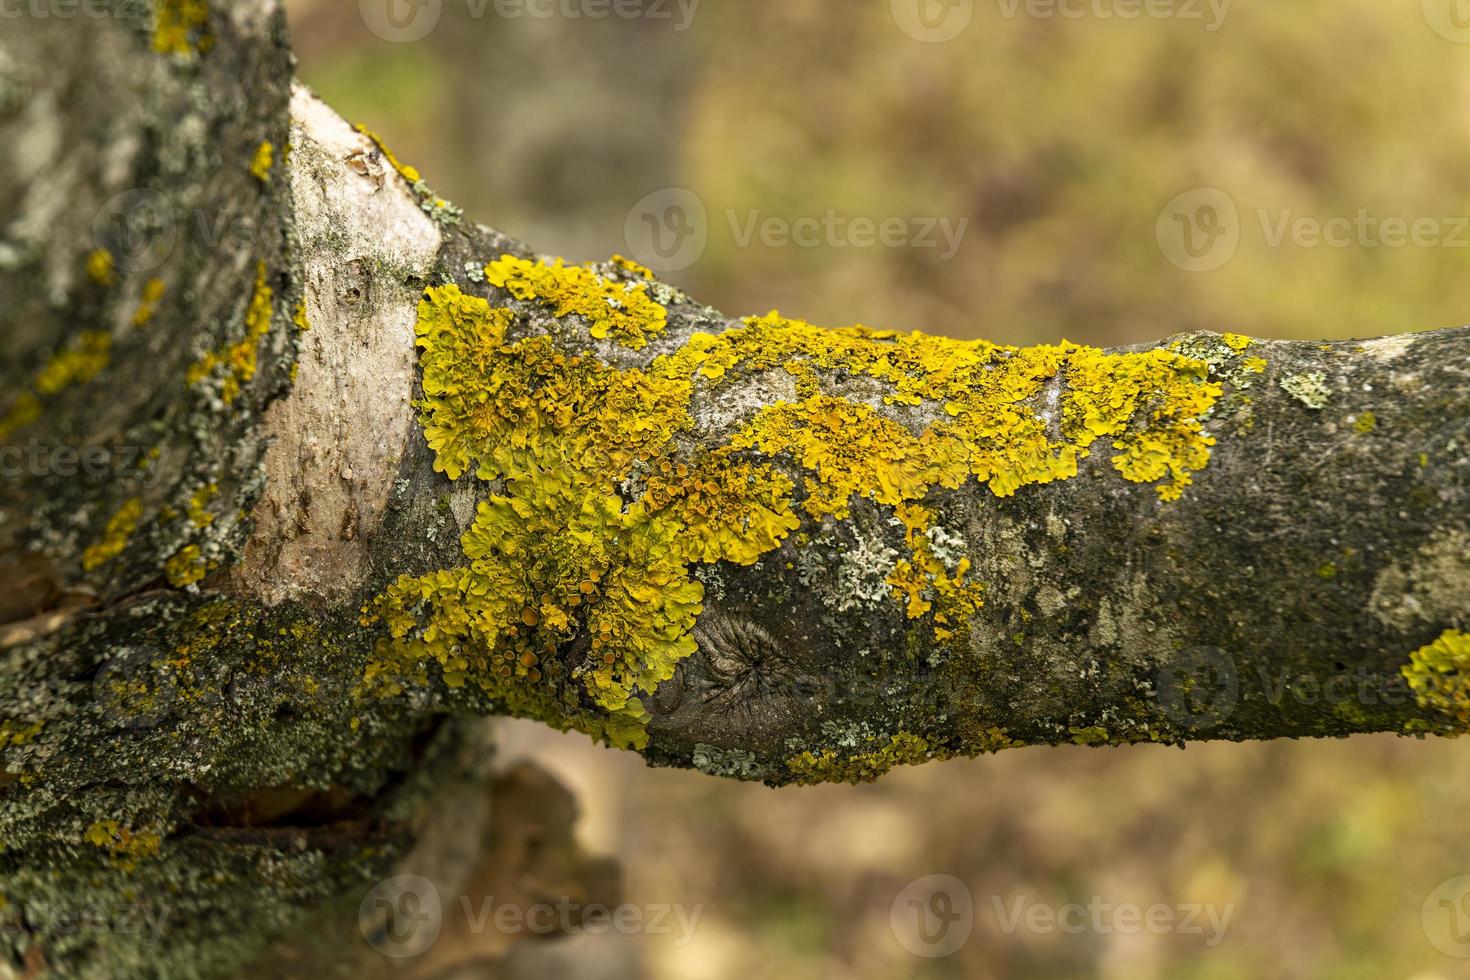 lichen on a tree branch lichen is a complex organism that arises from algae or cyanobacteria. photo